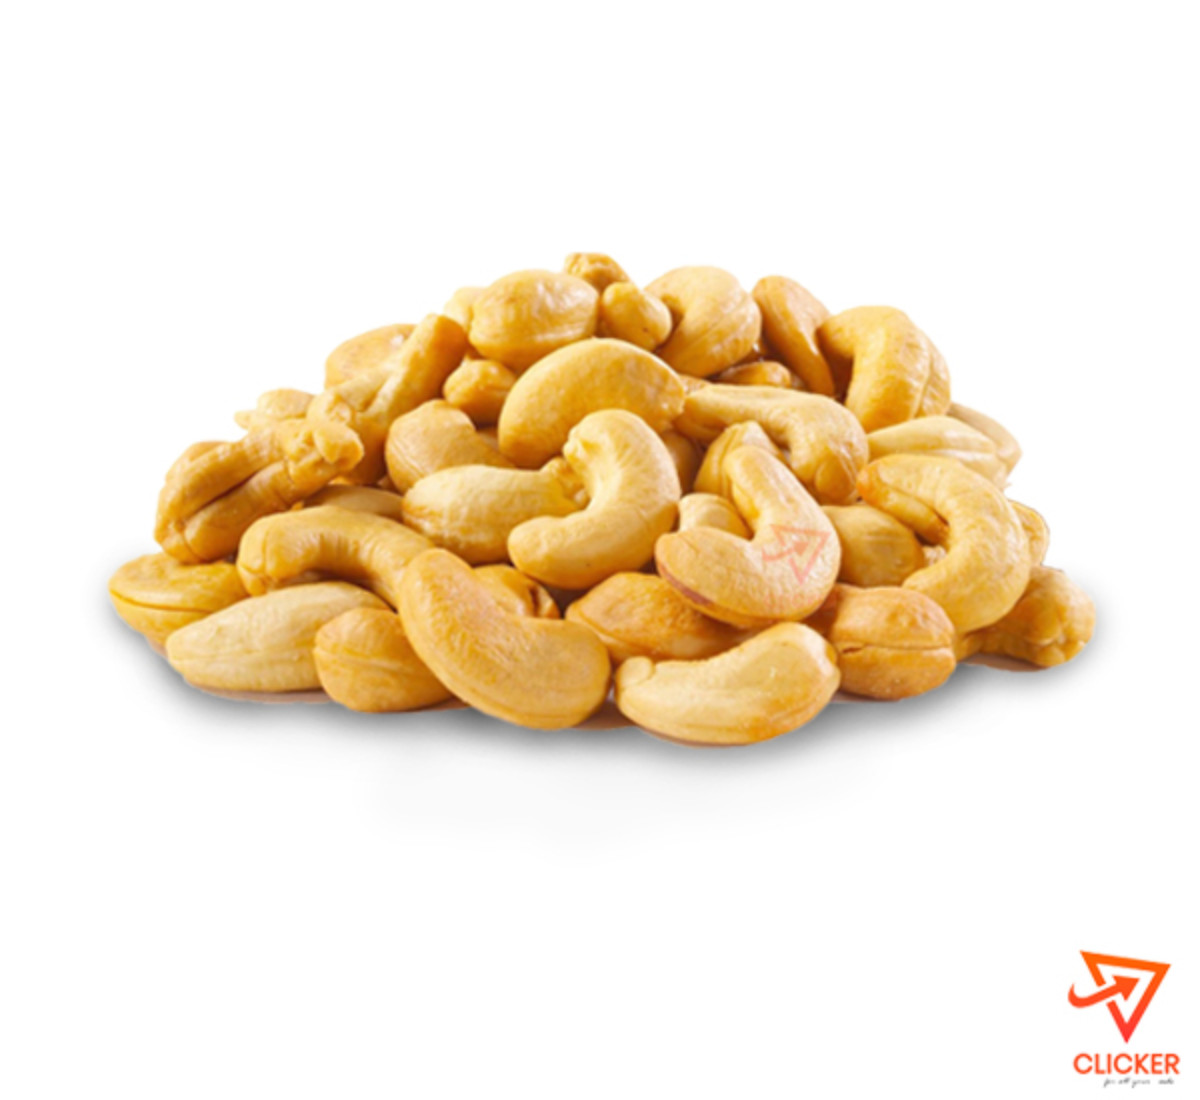 Clicker product 100G CASHEW NUTS 1099